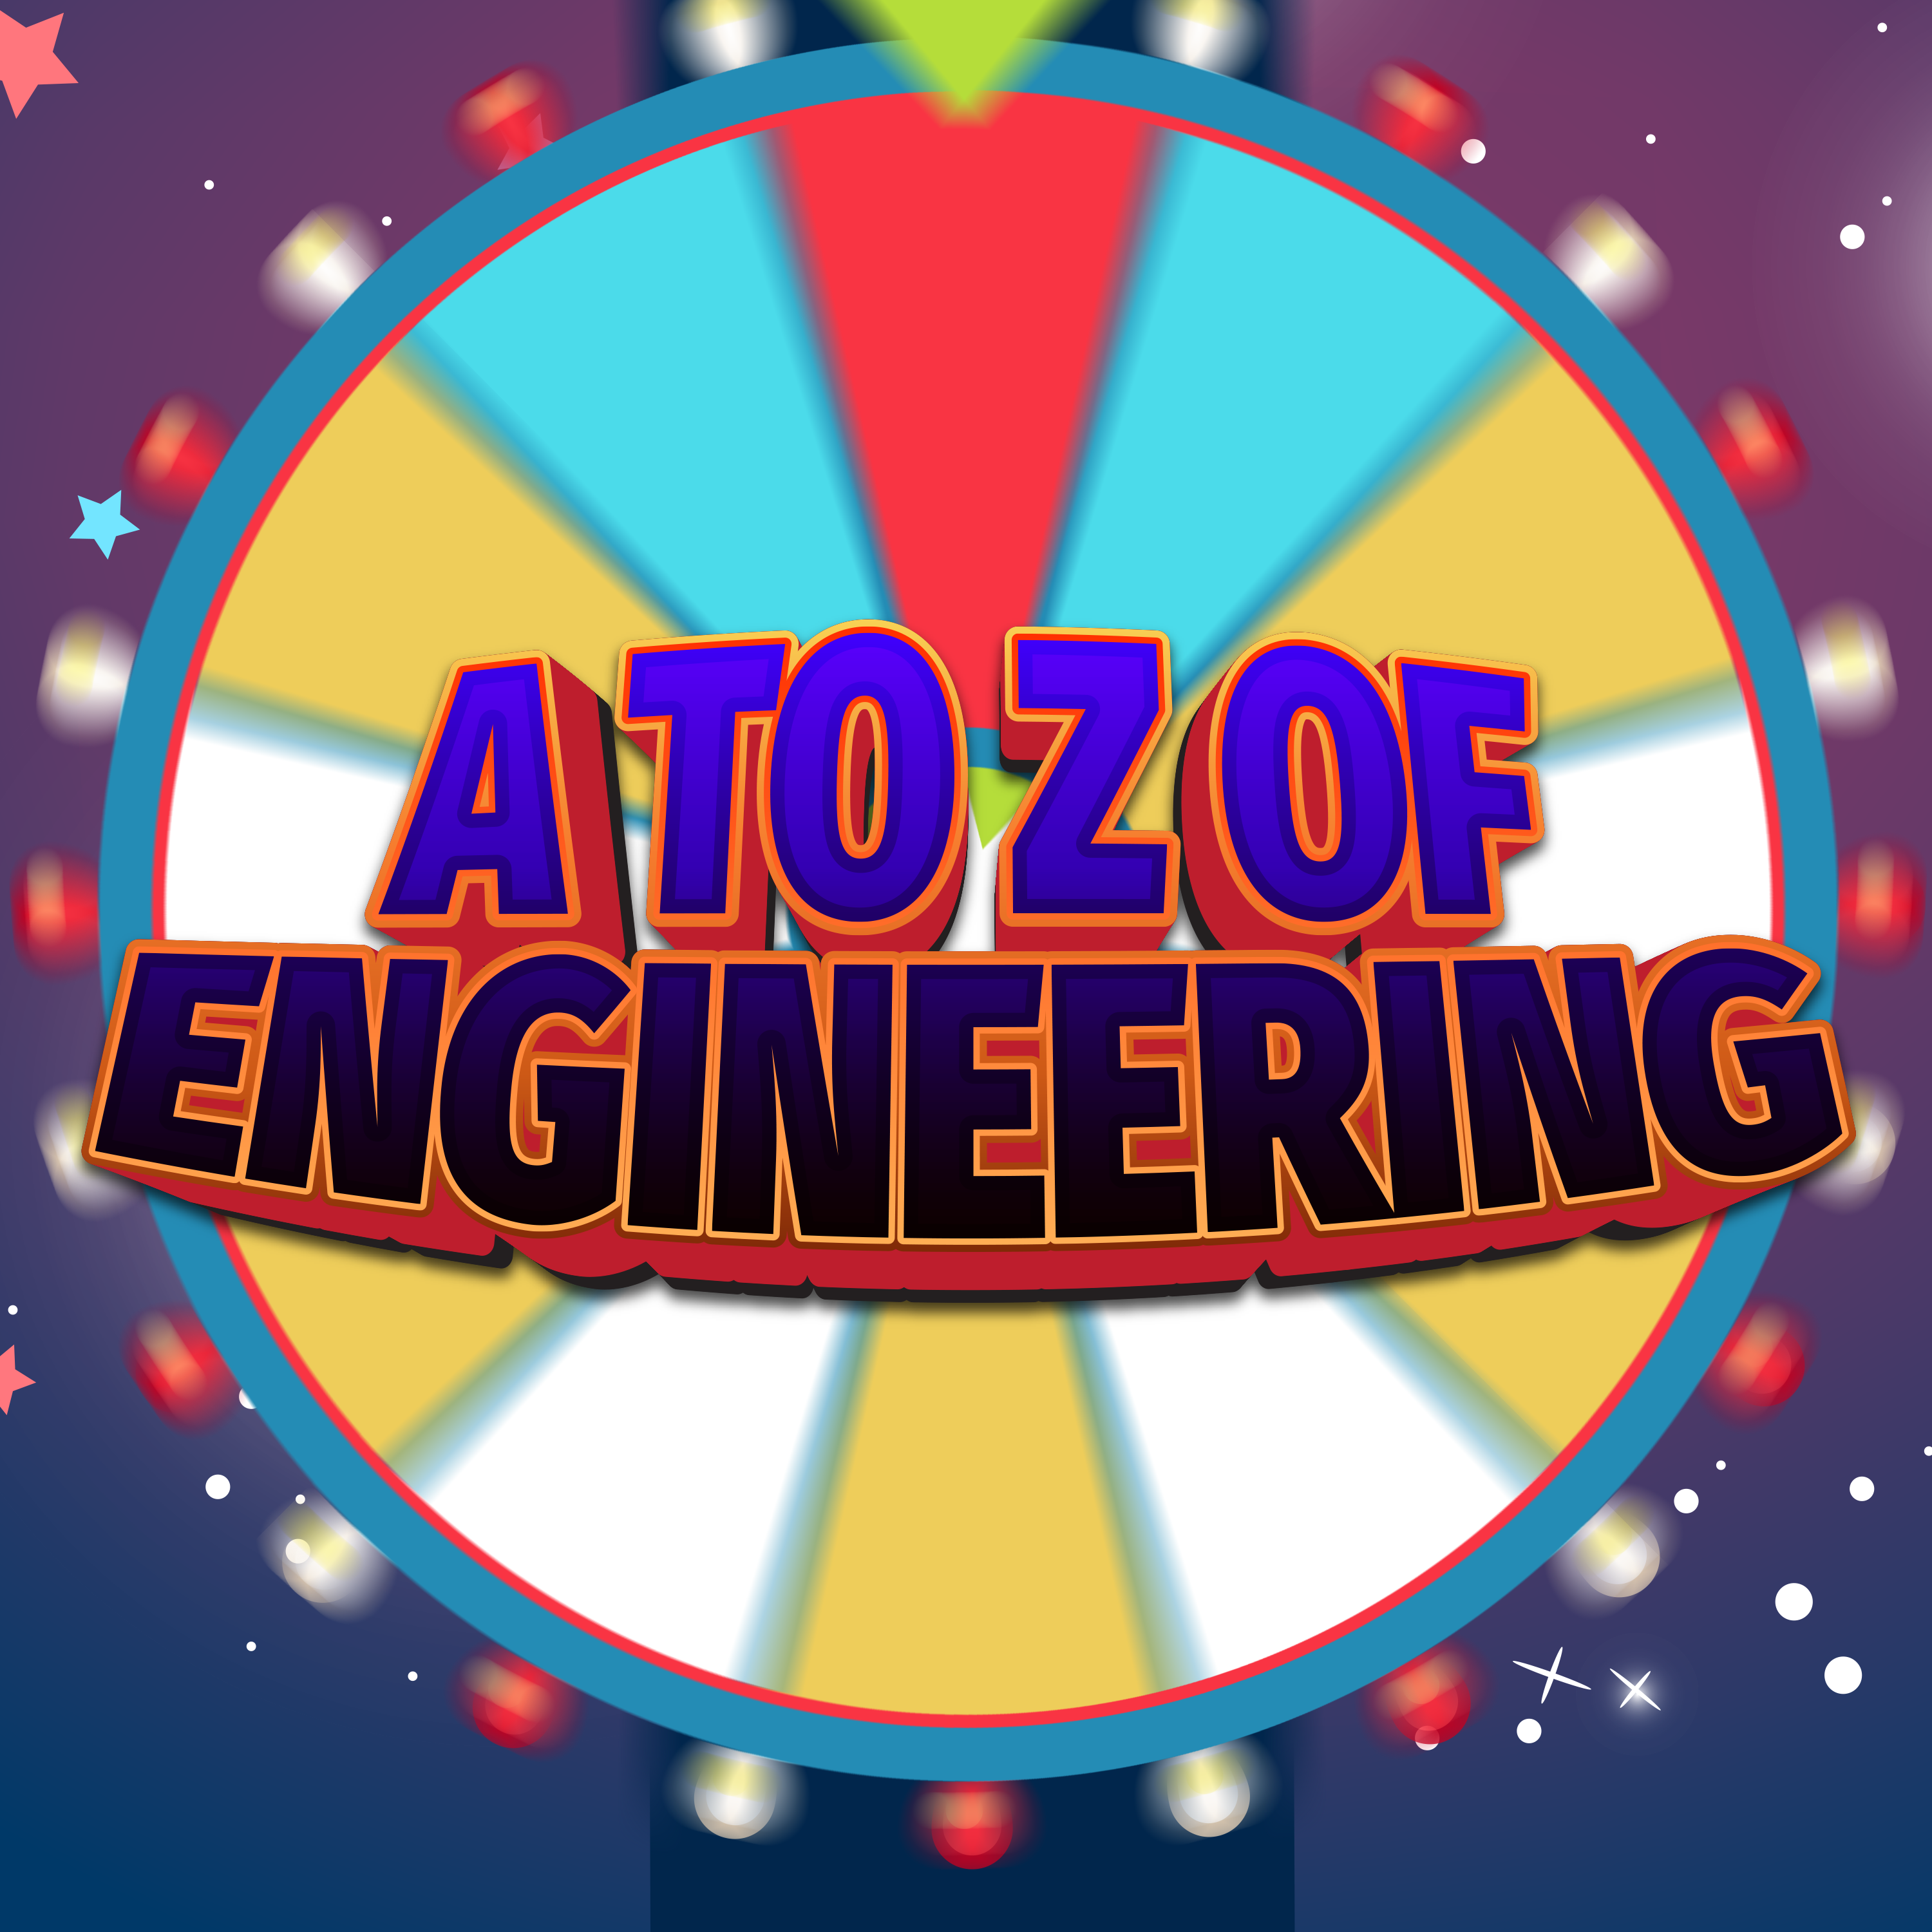 C is for Chemical (Engineer Academy - A to Z of Engineering)